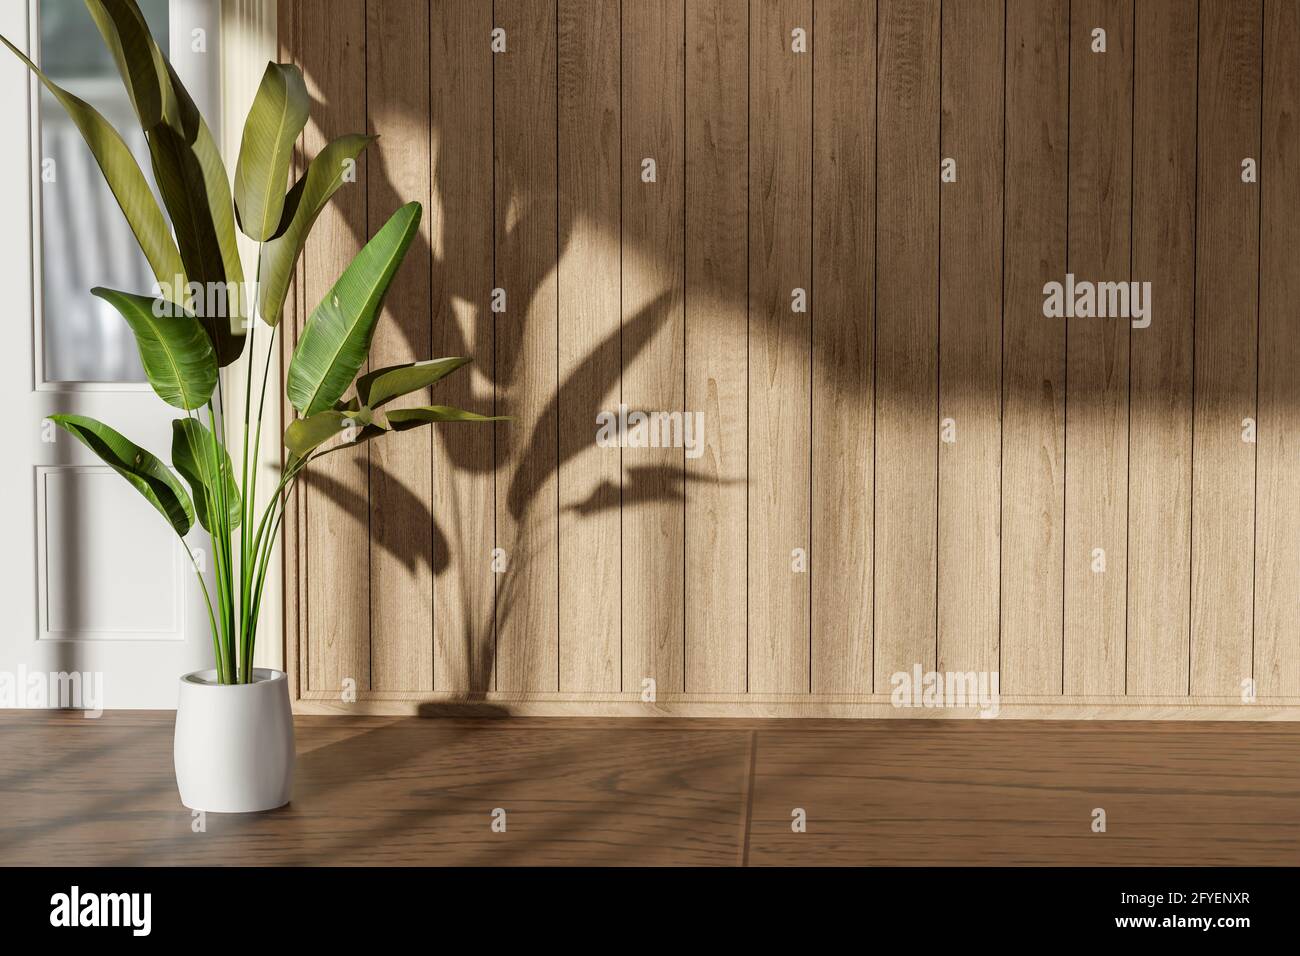 Plants decoration with shadow on empty room interior with wooden floor Stock Photo